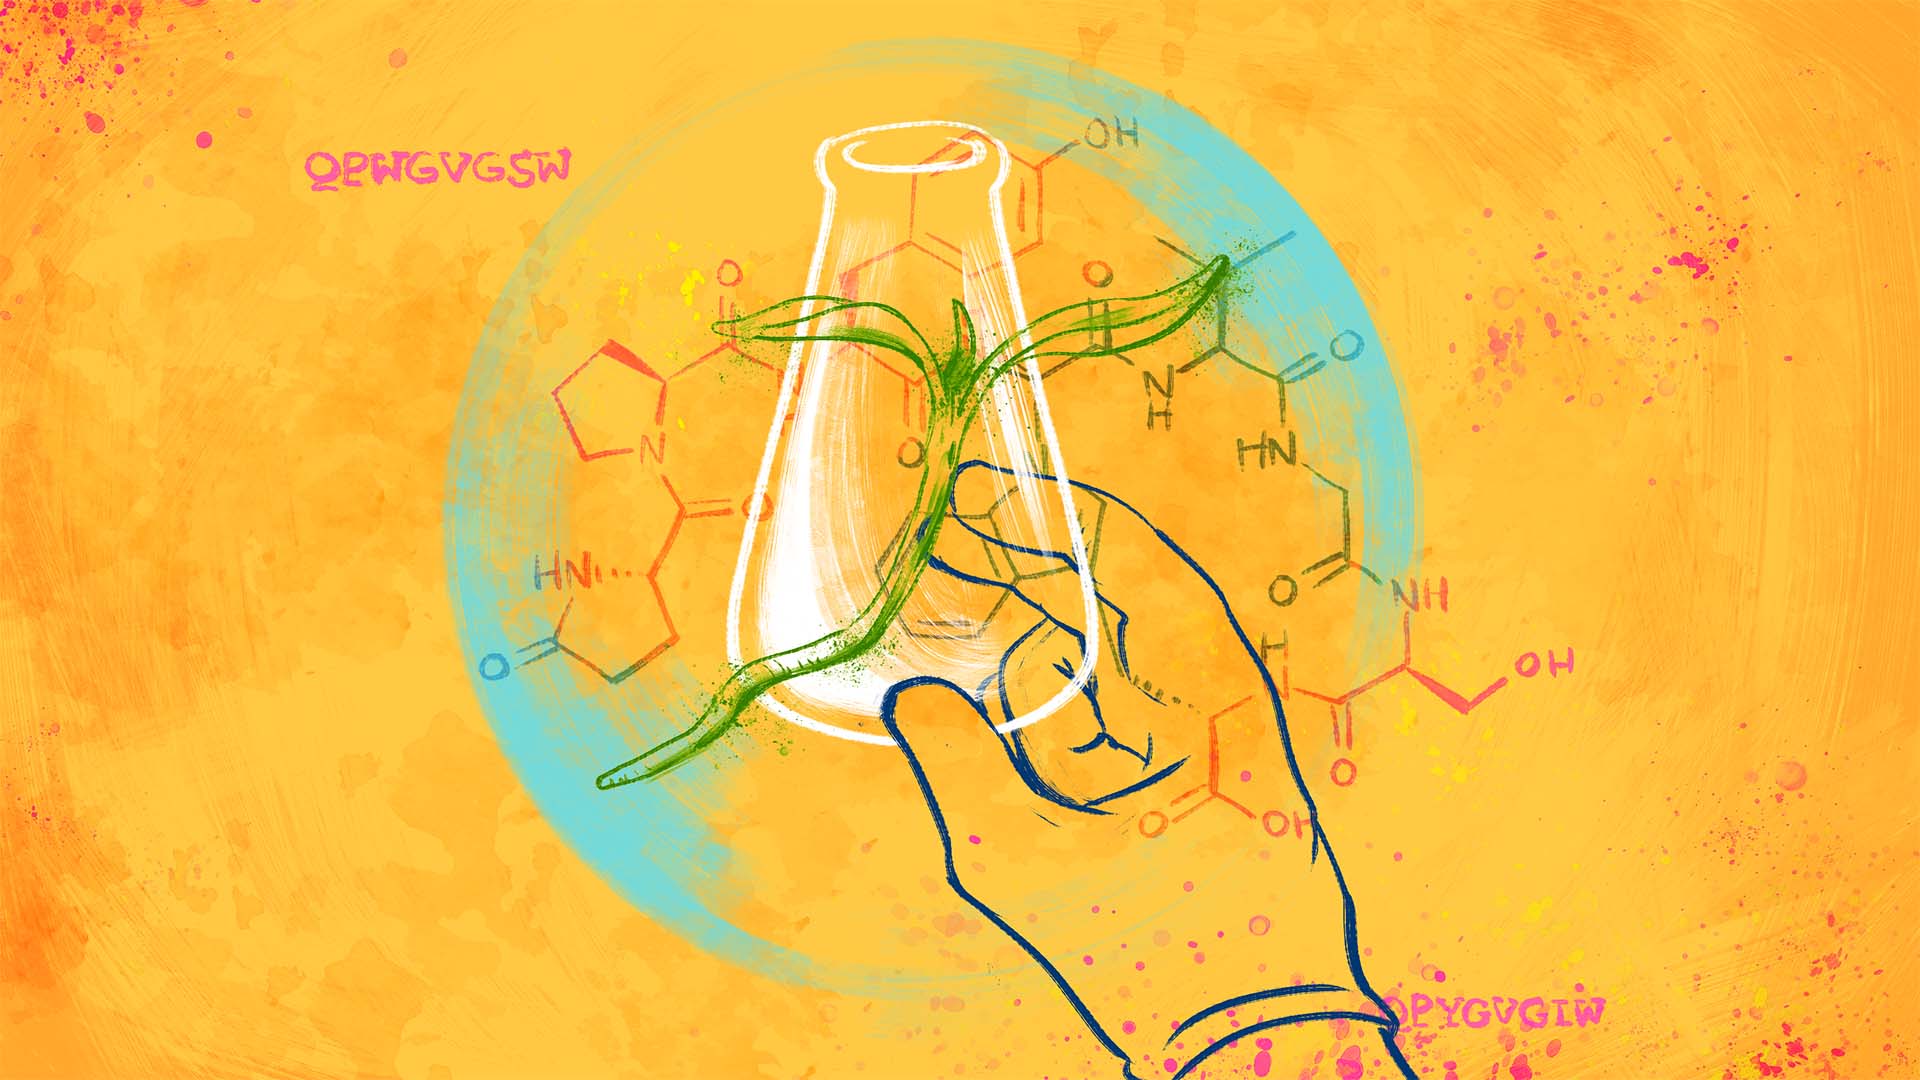 Illustration of a test tube overlaid with an illustration of a hand, plant, and chemical compound